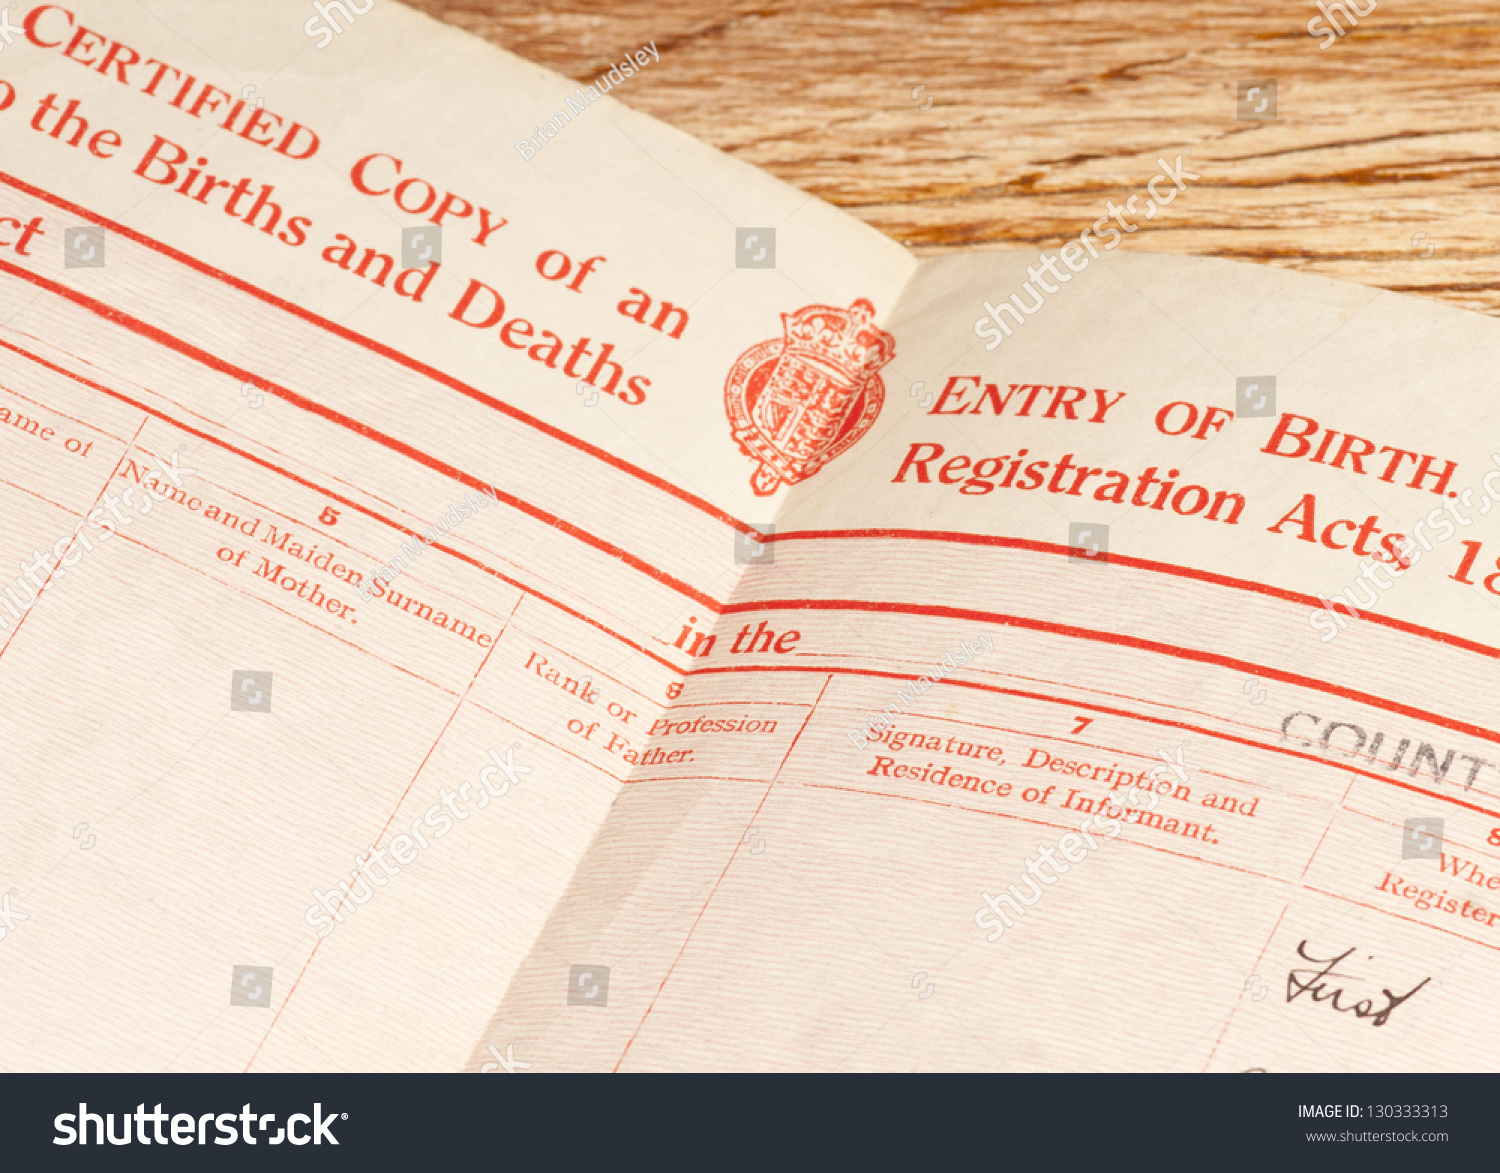 Old Circa 1948 Blank British Birth Certificate Showing The Main